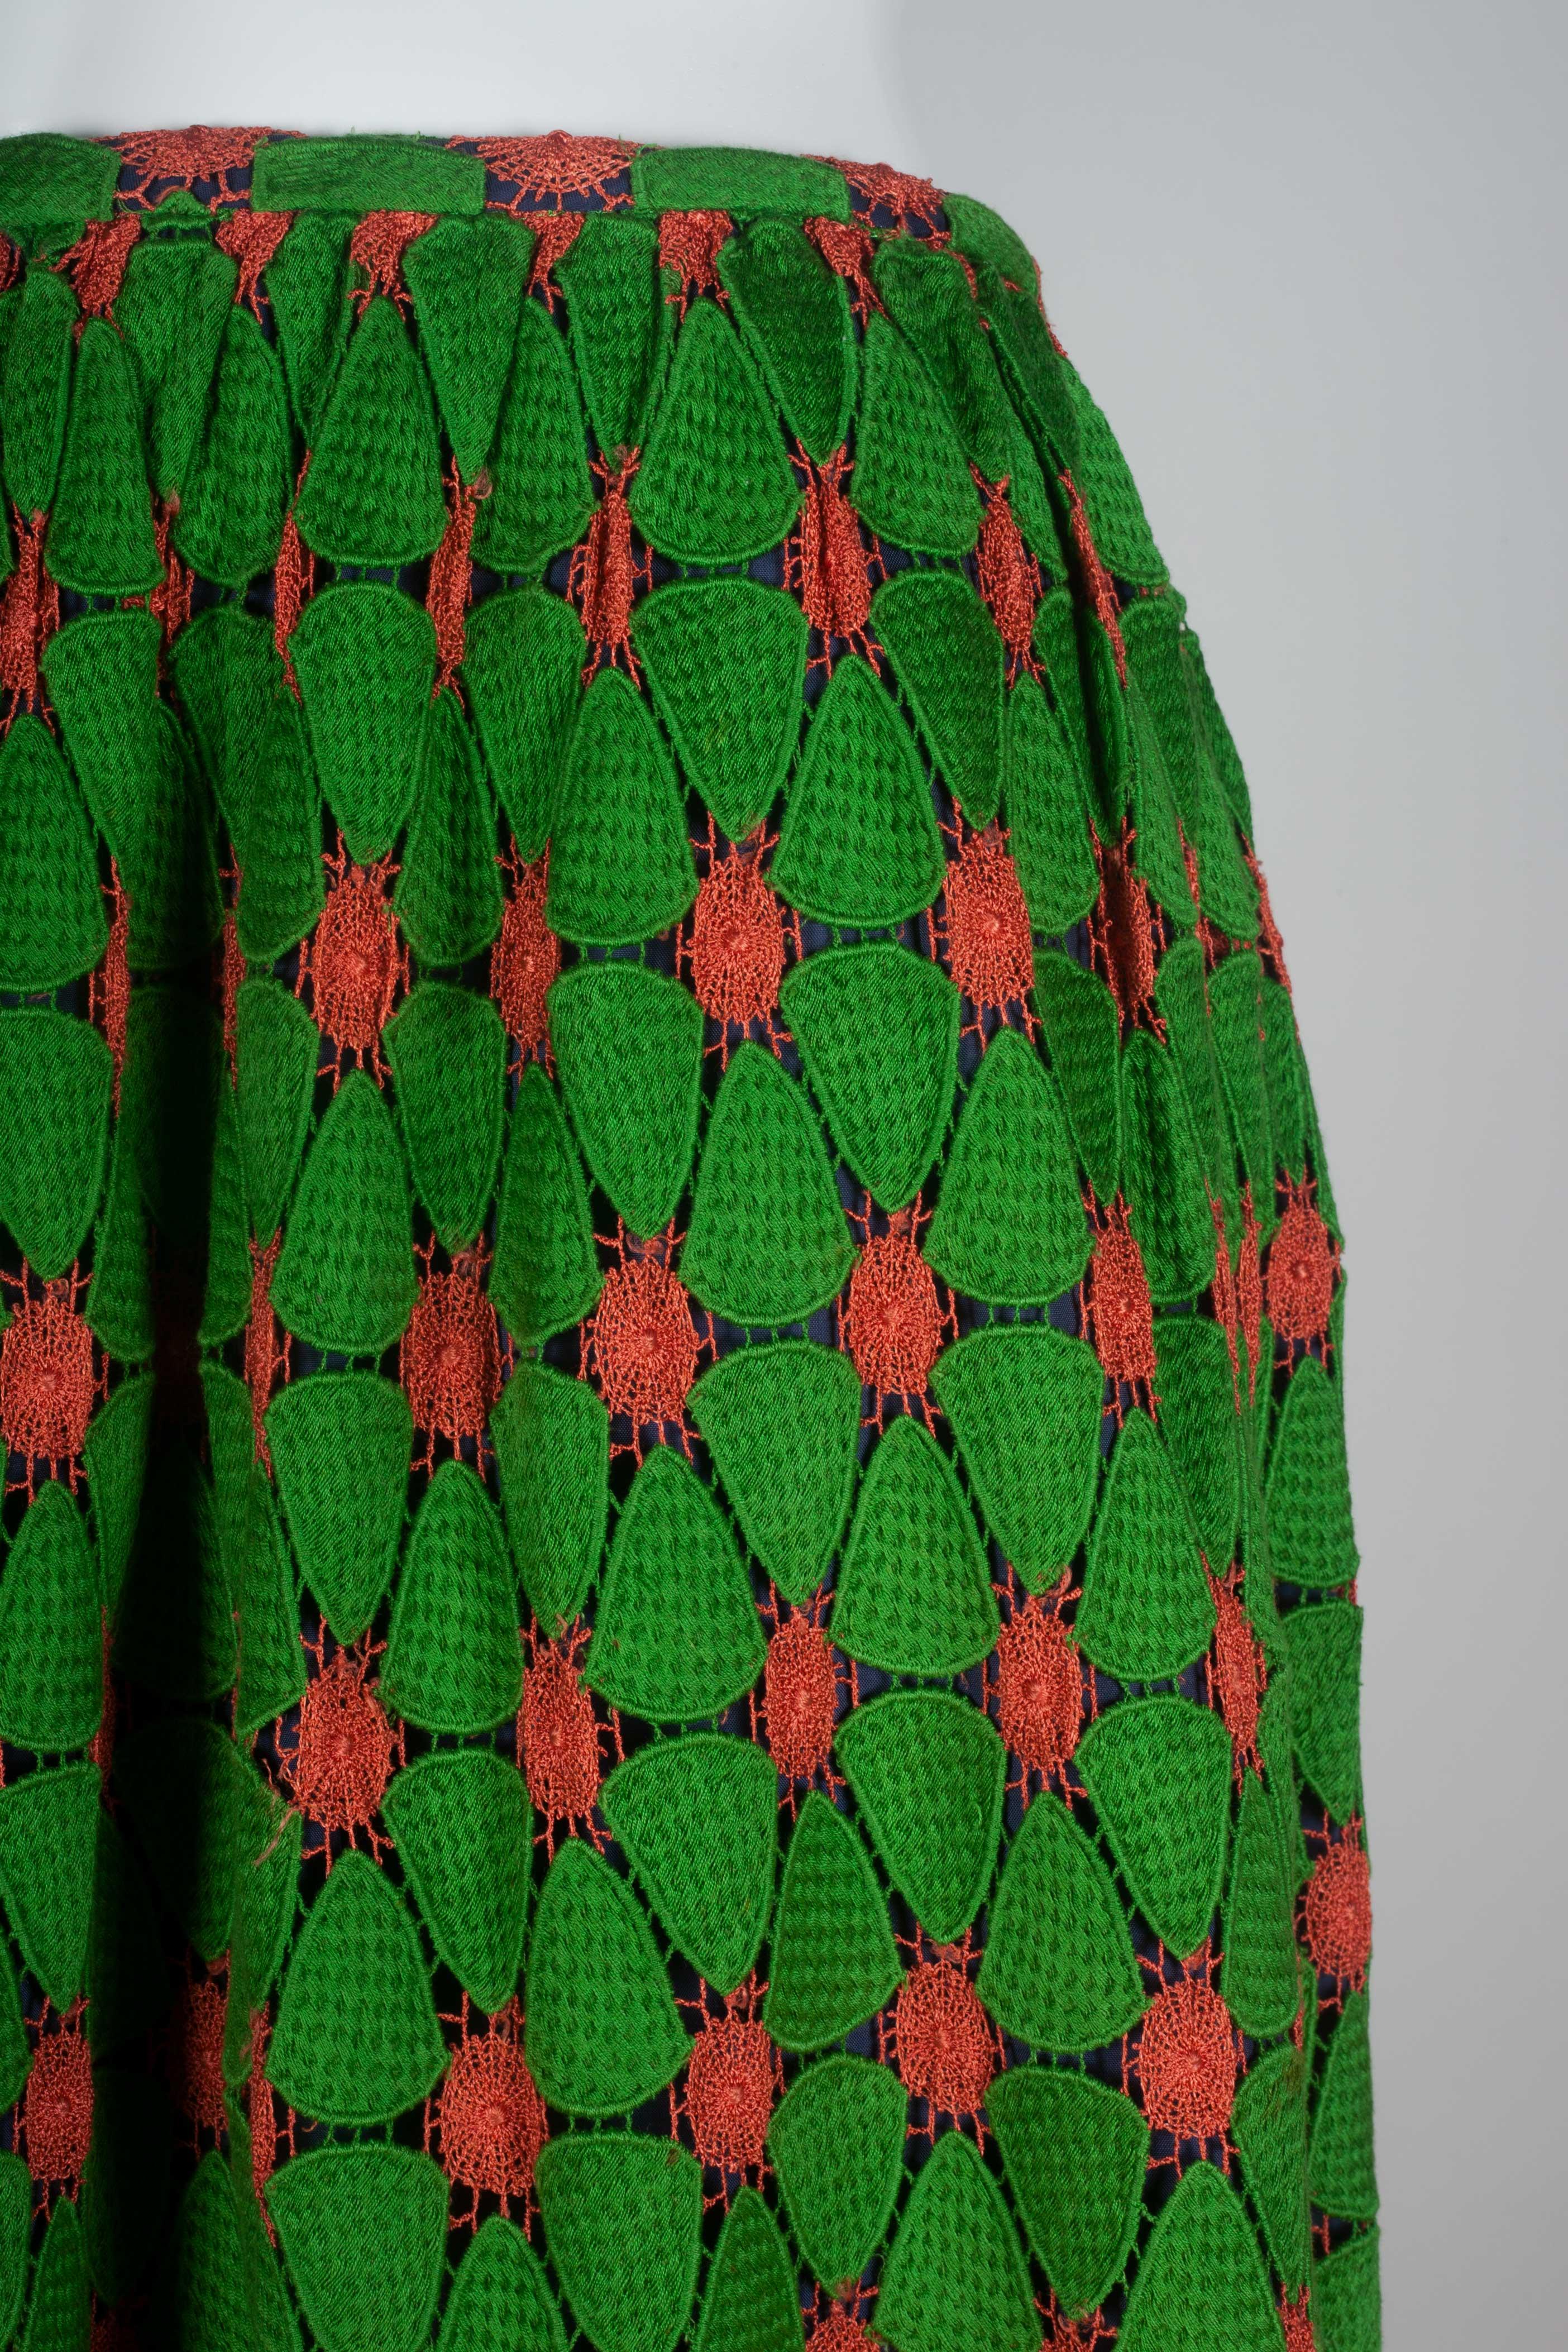 Comme des Garçons Robe de Chambre guipure lace skirt from Japan. Bright coral orange and green surface with green cupra lining. 

YEAR: 2000
MARKED SIZE: L
US WOMEN'S: S/M
US MEN'S: S
FIT: Regular
HIPS: 19